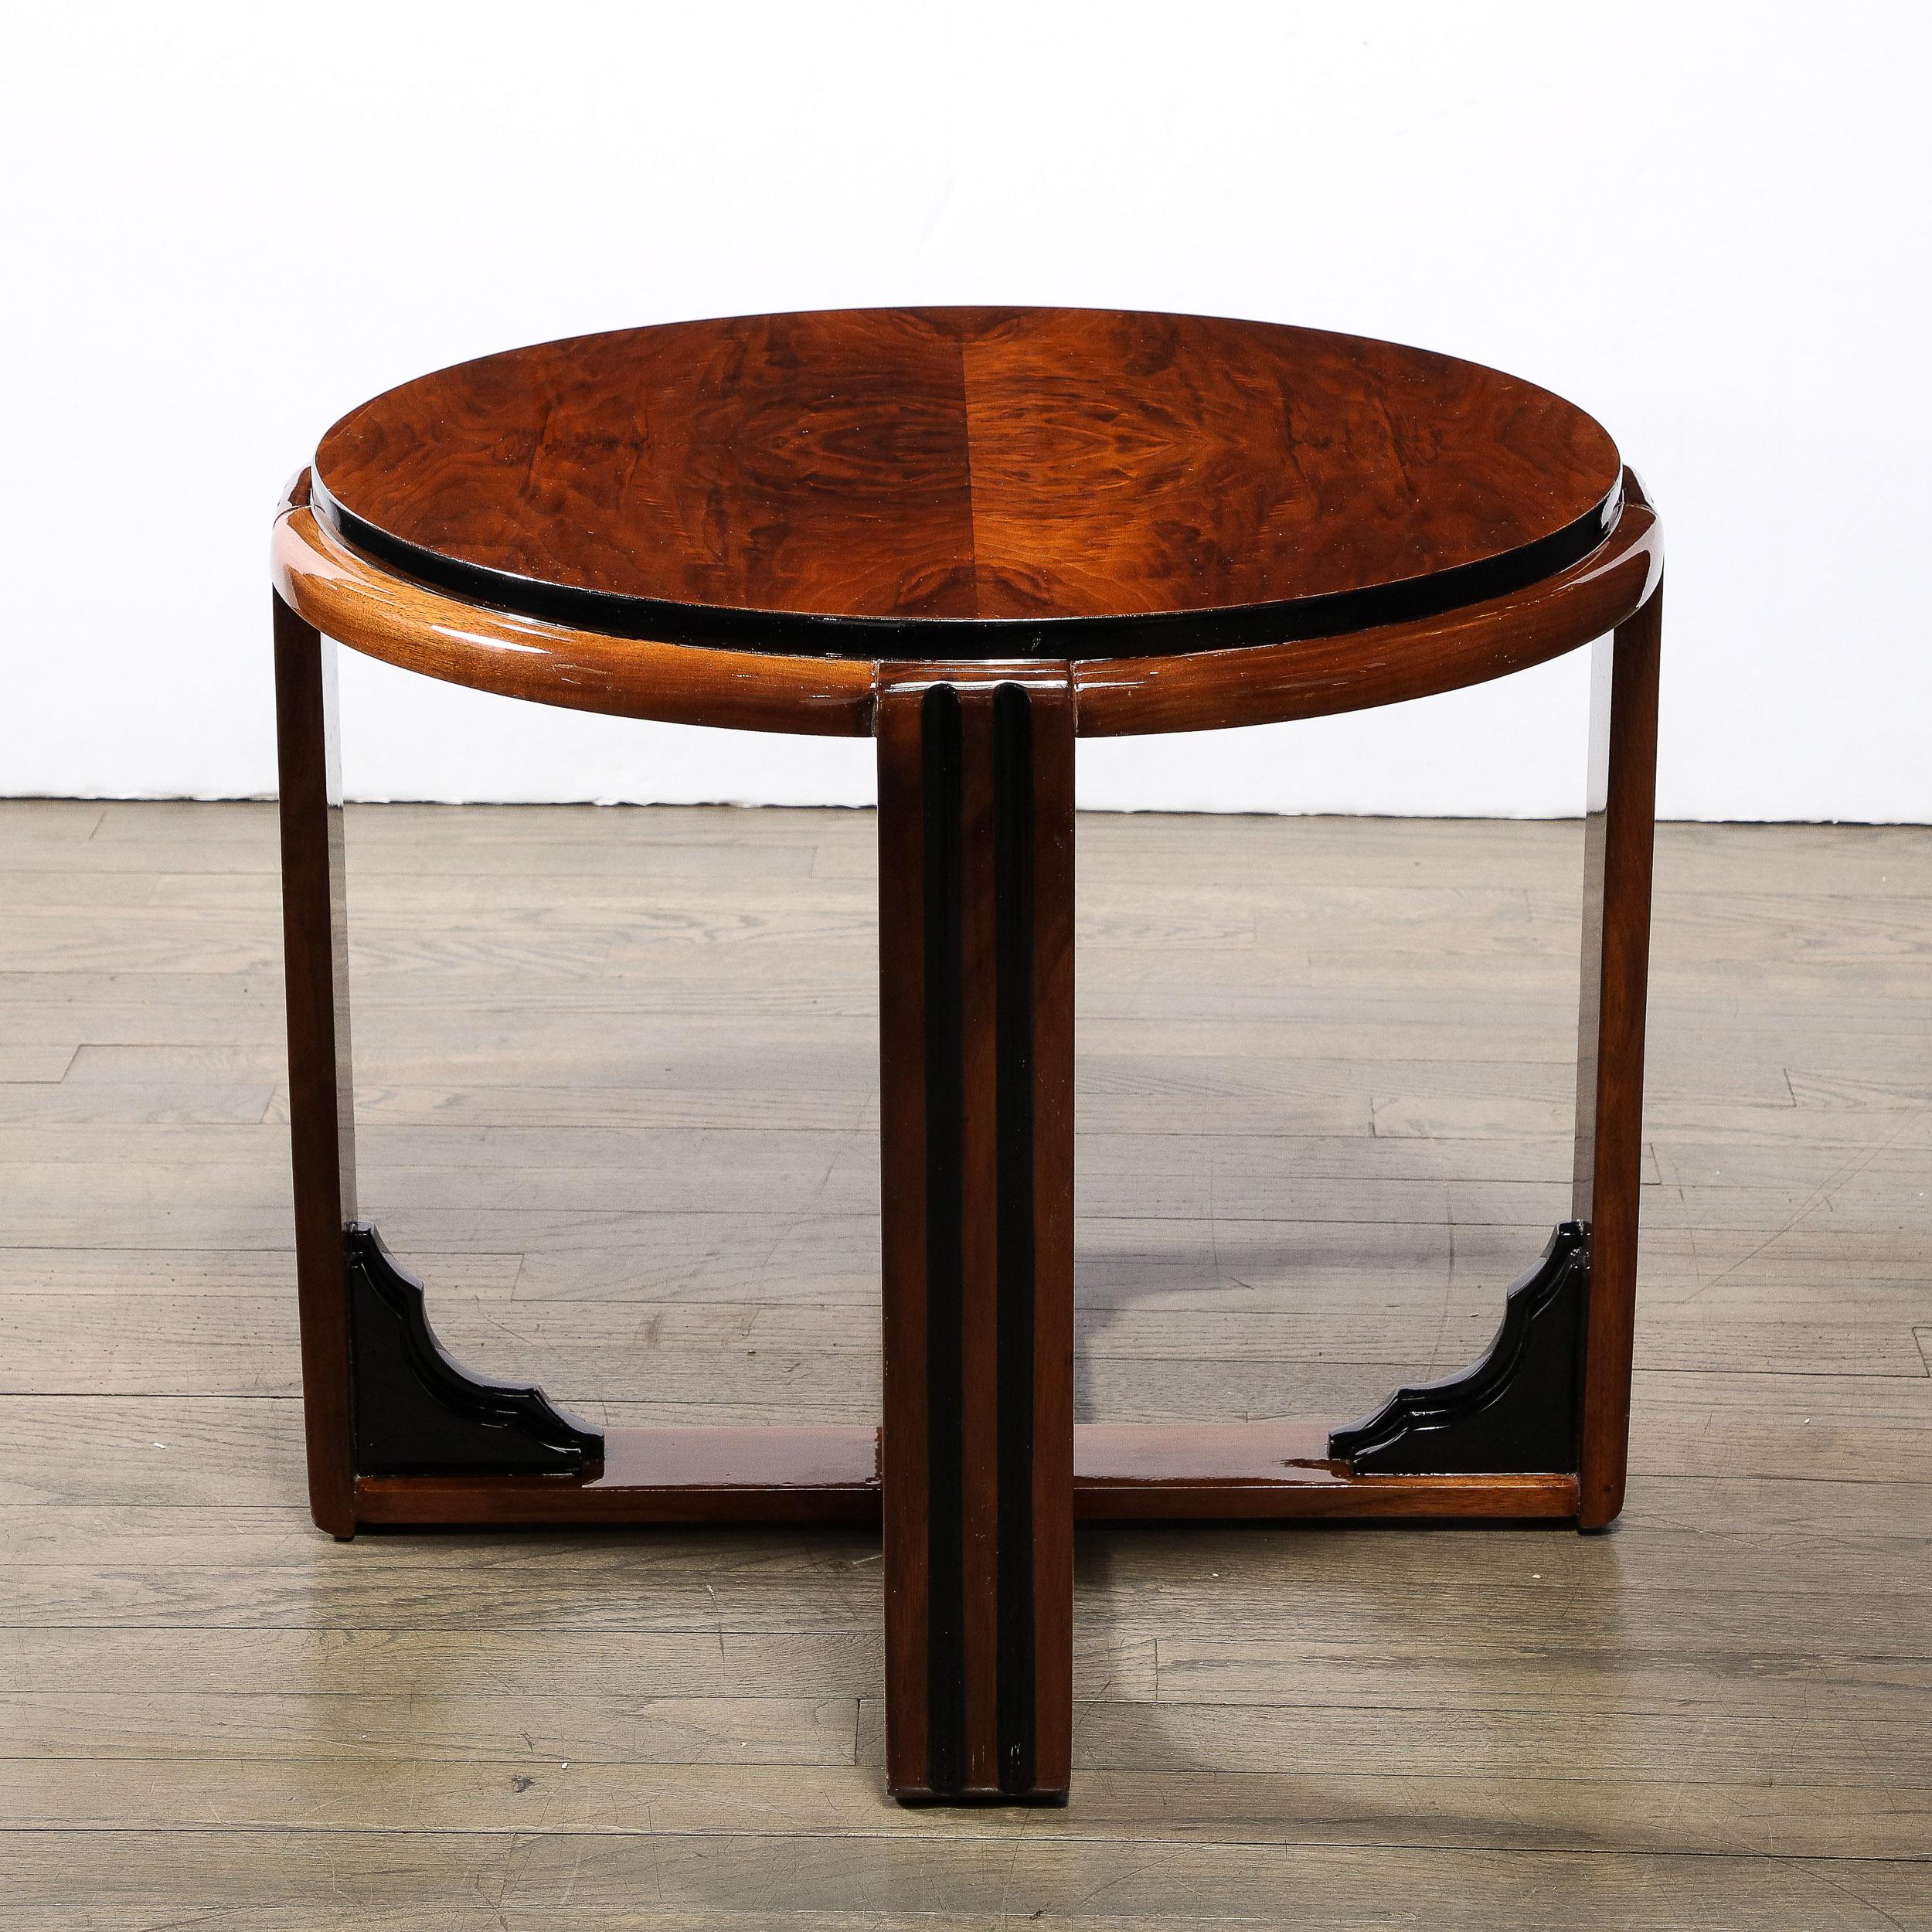 This elegant Art Deco Machine Age skyscraper side/ occasional table was realized in the United States circa 1935. It features a two skyscraper style top in burled walnut (showcasing a dramatic natural woodgrain) with a slightly inset center banded